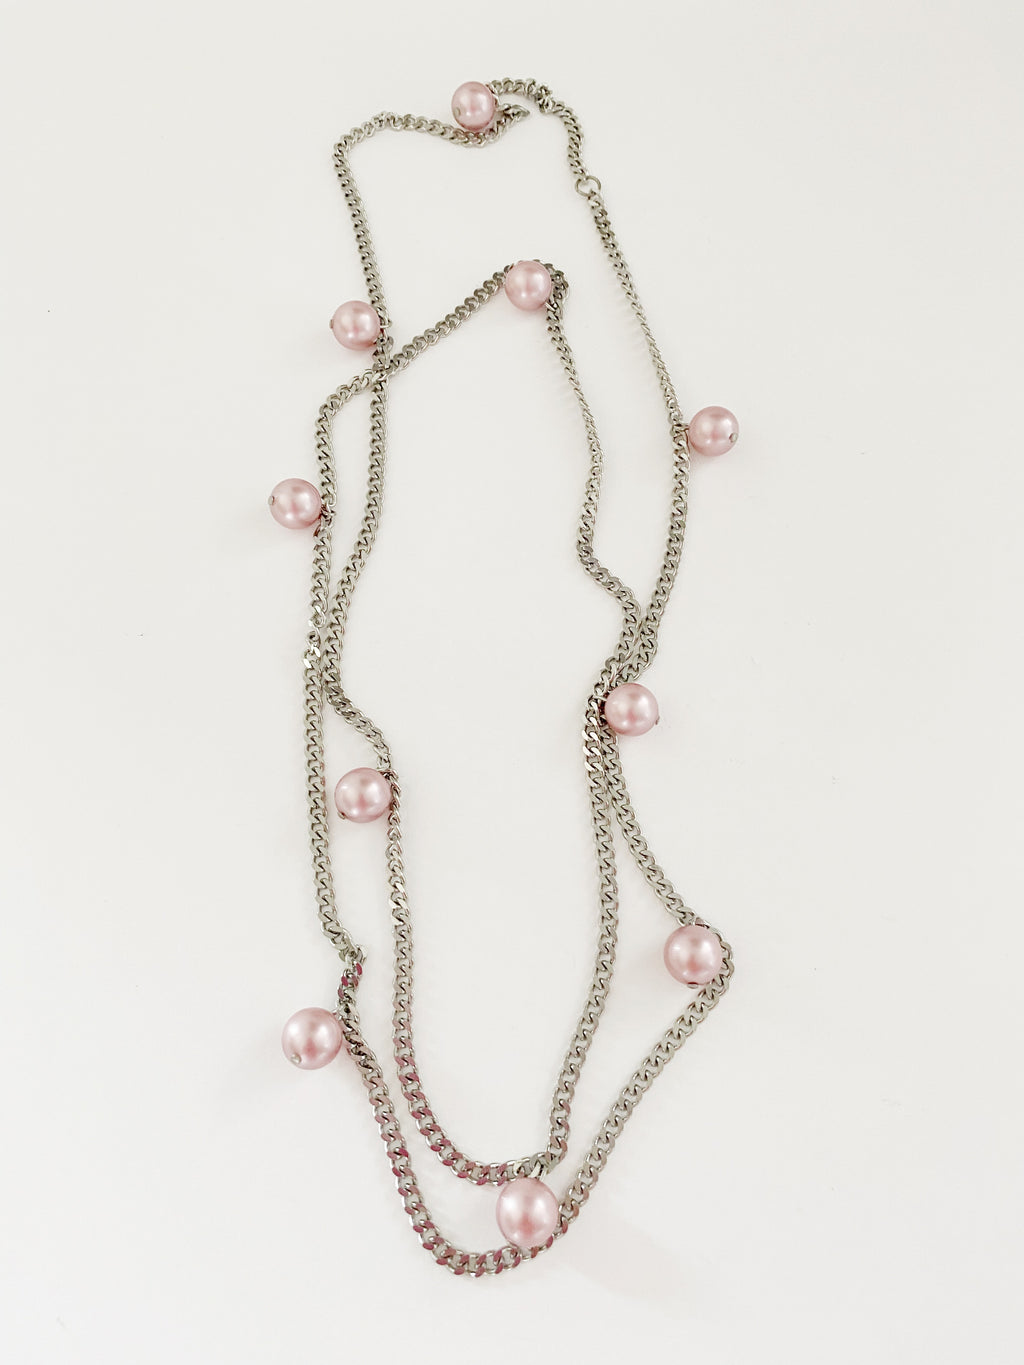 Collier style style sautoir Coco rose